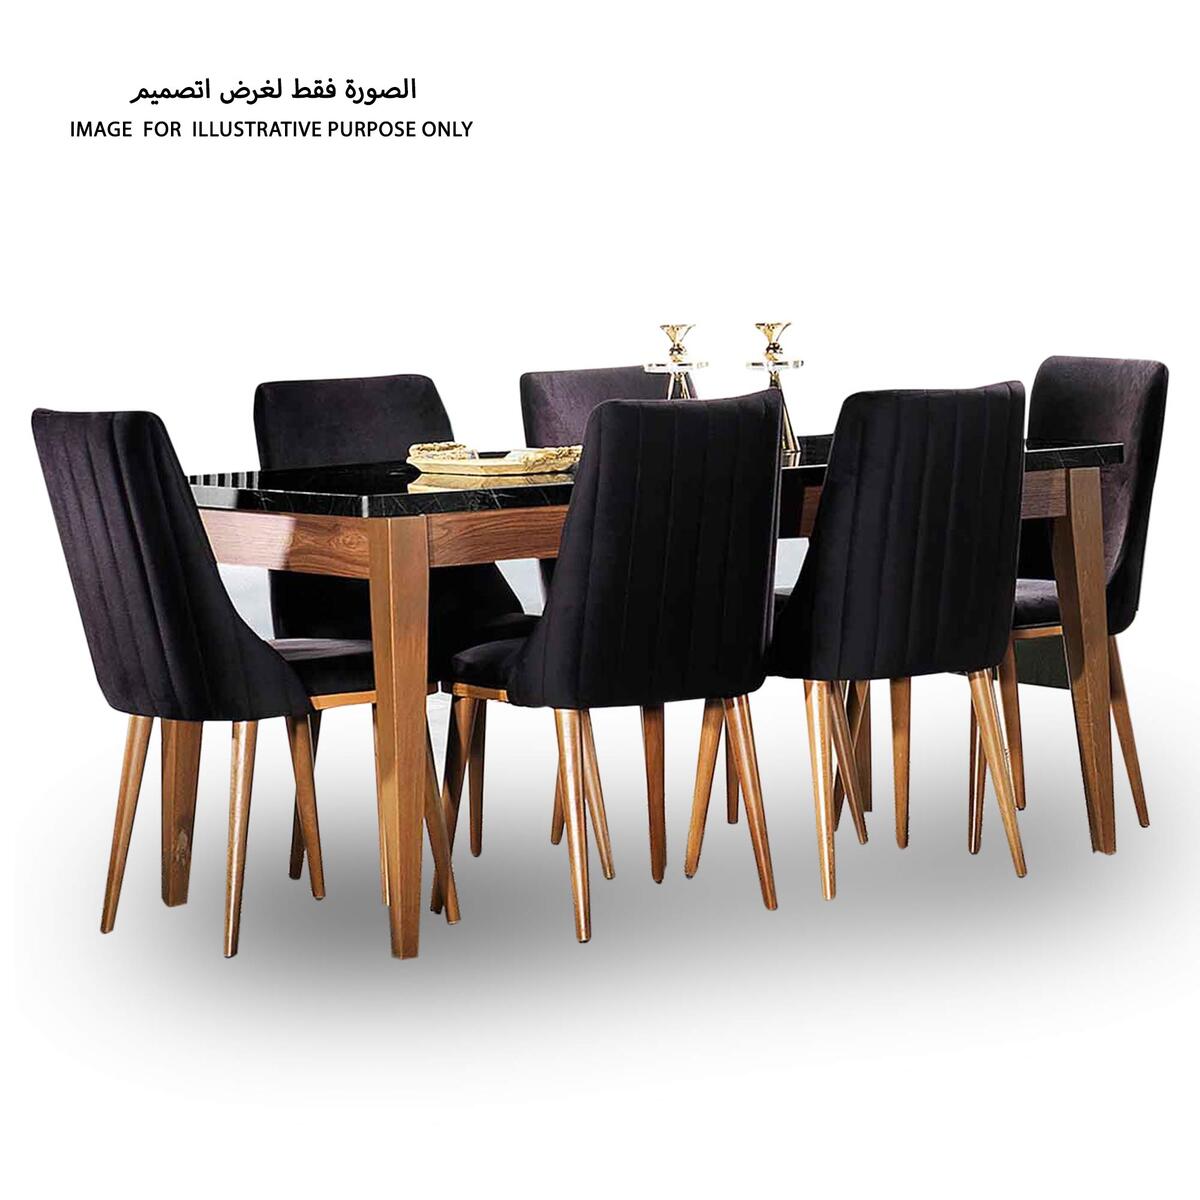 LIZBON Extendable Dining Table+6 Chair .Size Table:Size:73.5x90x160-200 Cms (HxWxL). Size Chair:90x50x48 Cms(HxWxD)